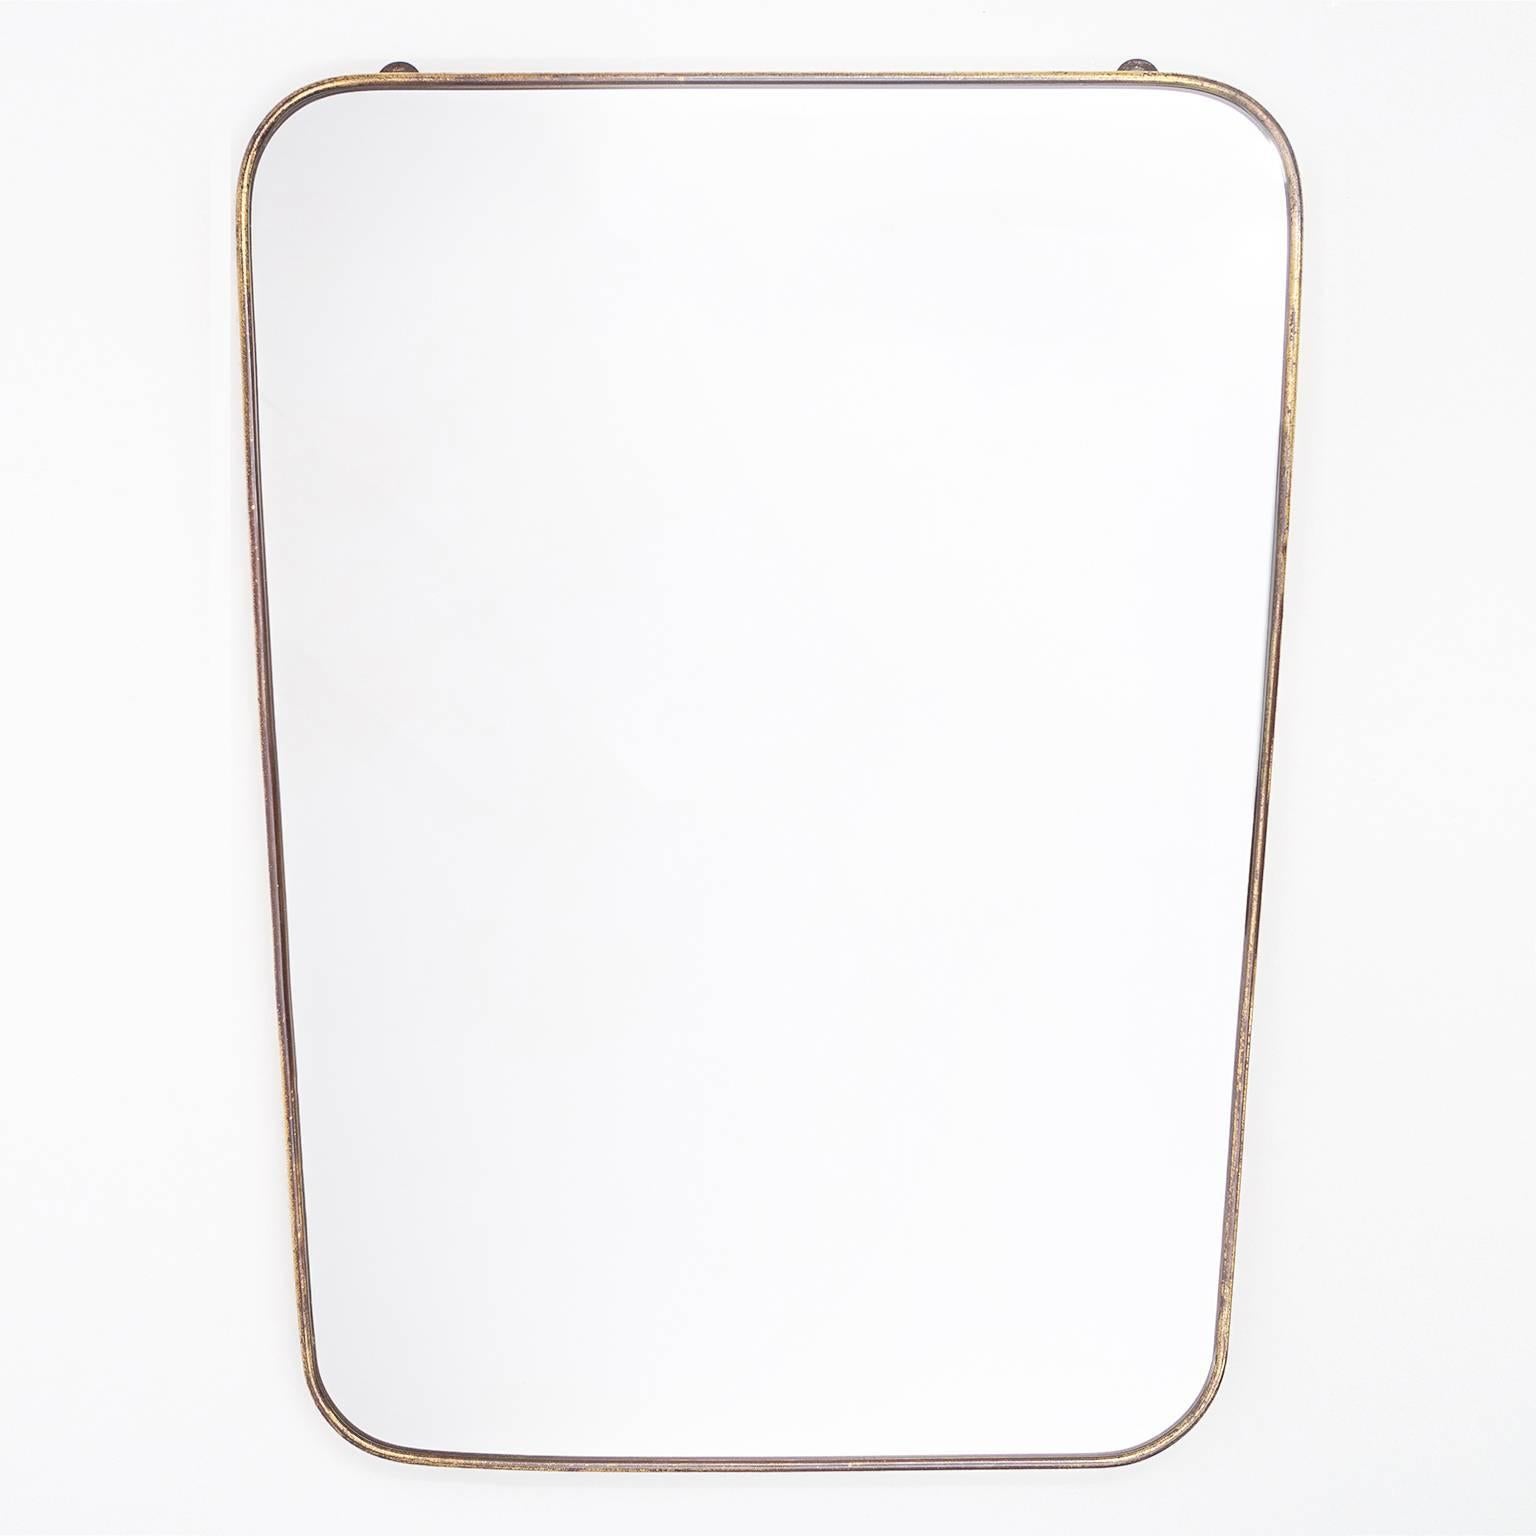 Classic Gio Ponti style Italian brass mirror from the 1950s. A lean, tapered design with rounded corners this mirror has its original silvered mirror in wonderful condition paired with a charming patina on the brass. Width at the bottom is